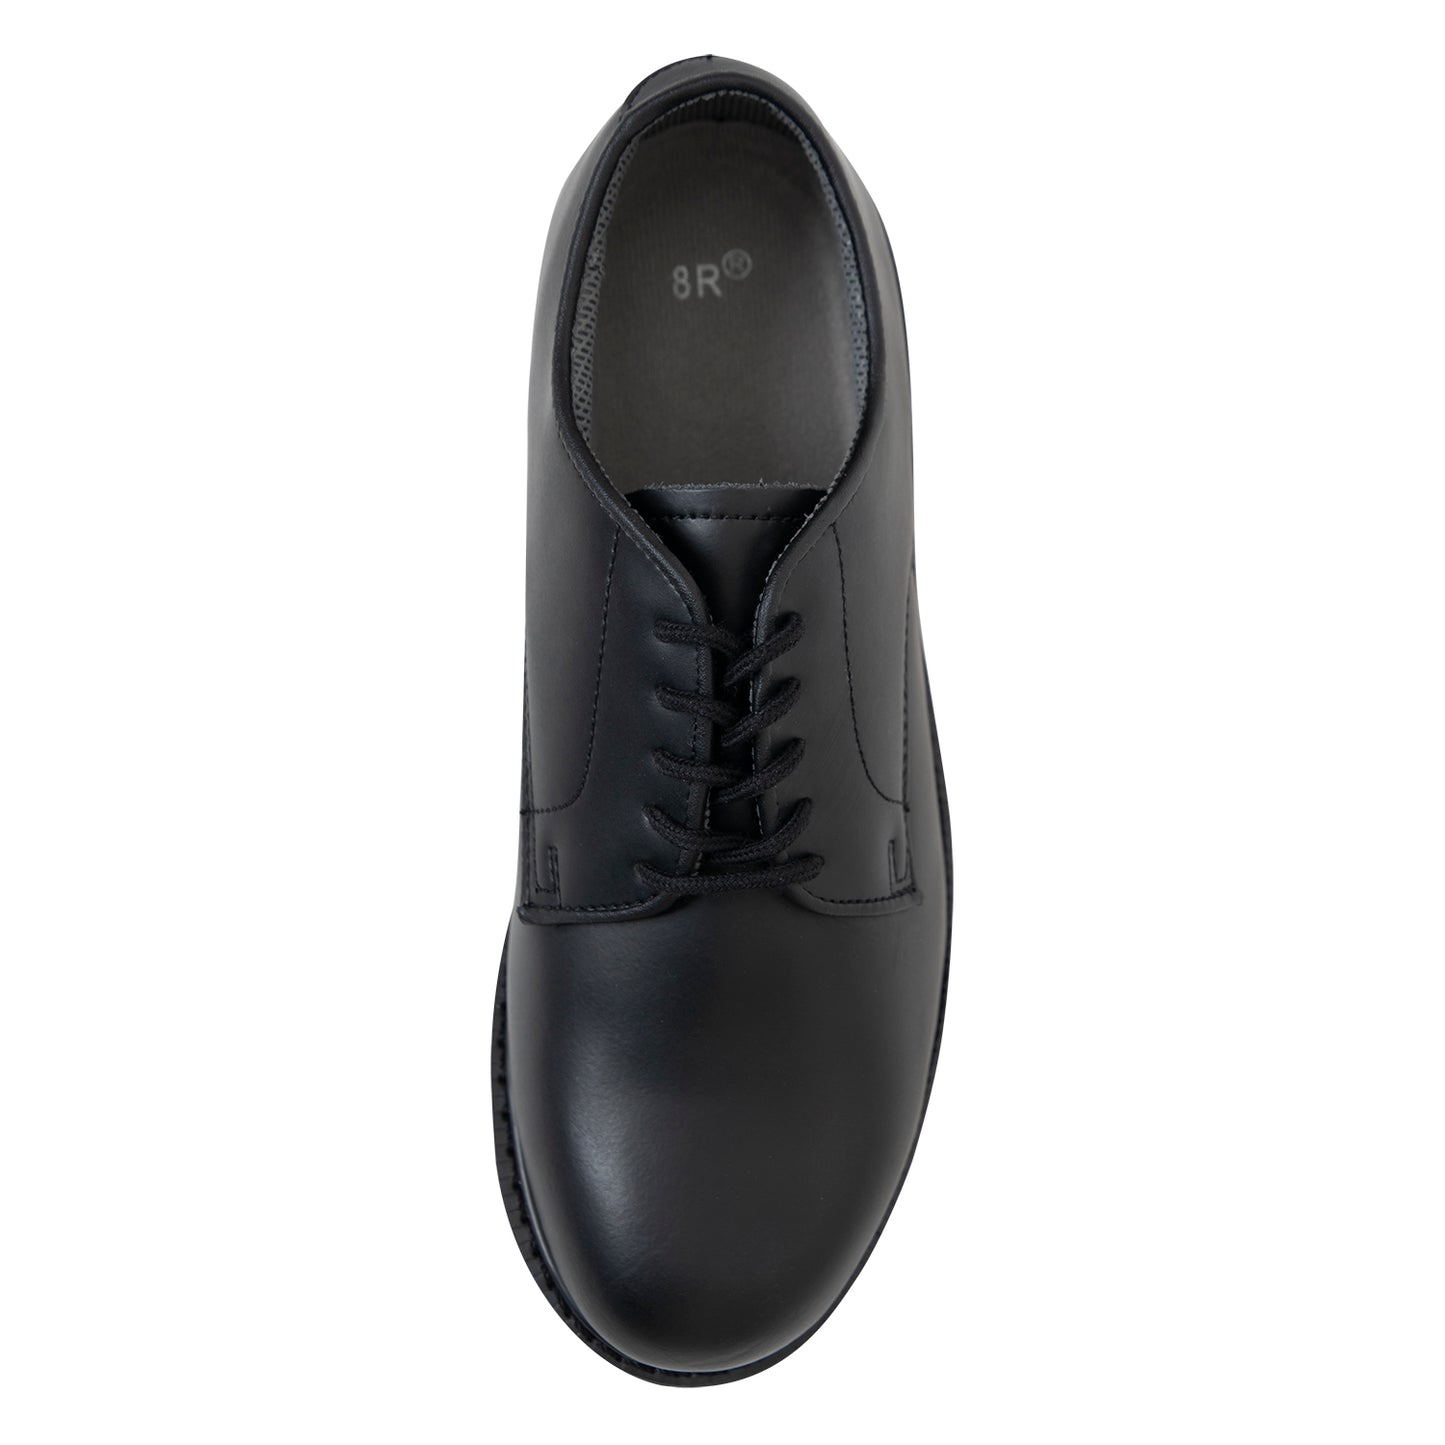 Rothco Flat Finish Uniform Oxford Leather Formal Shoes